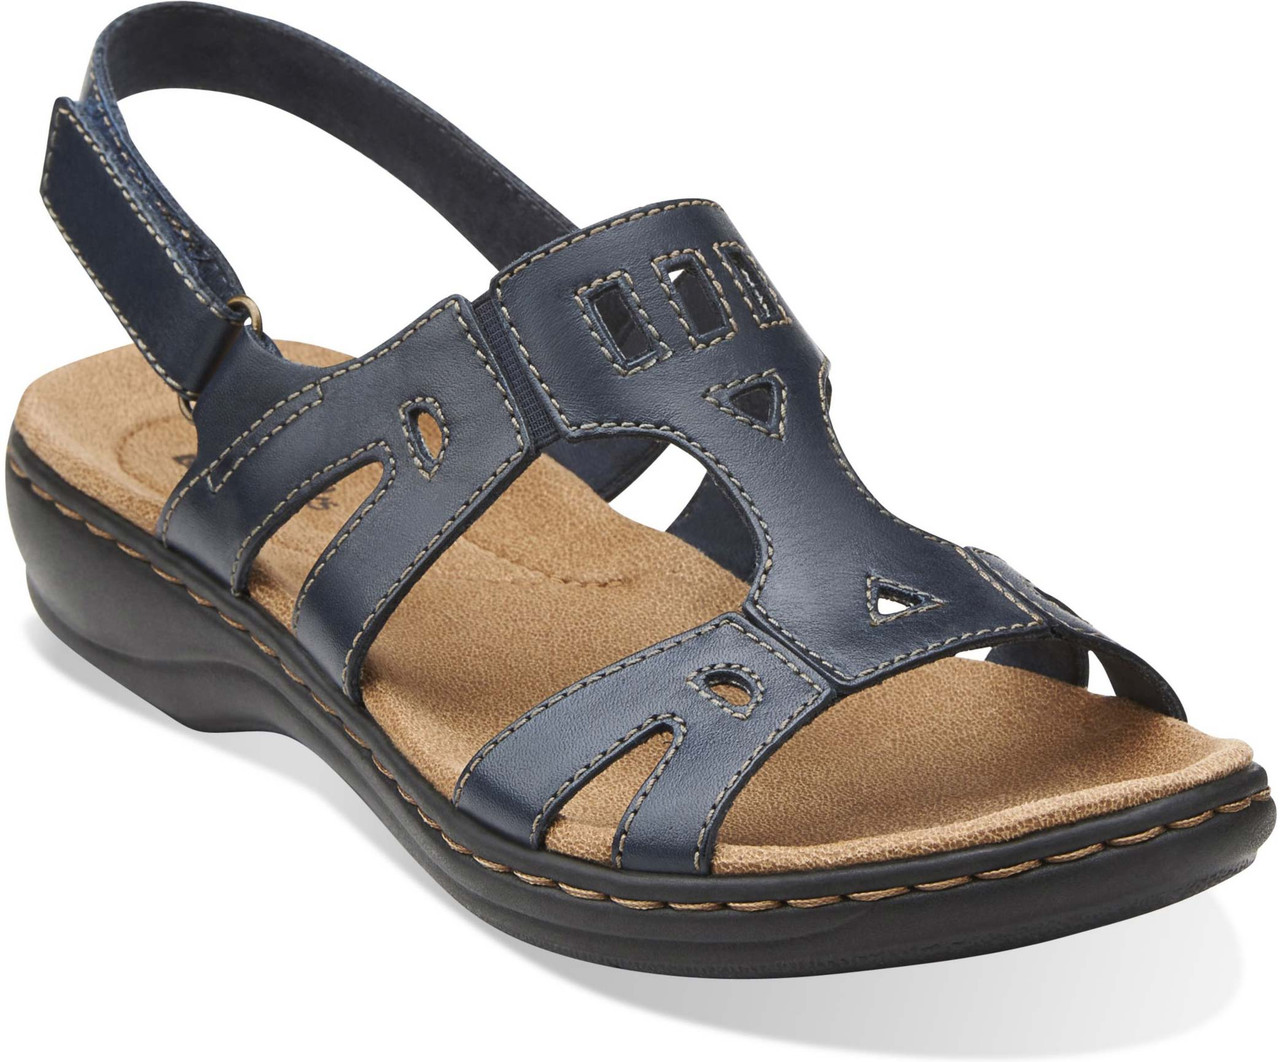 clarks leisa annual leather sandals